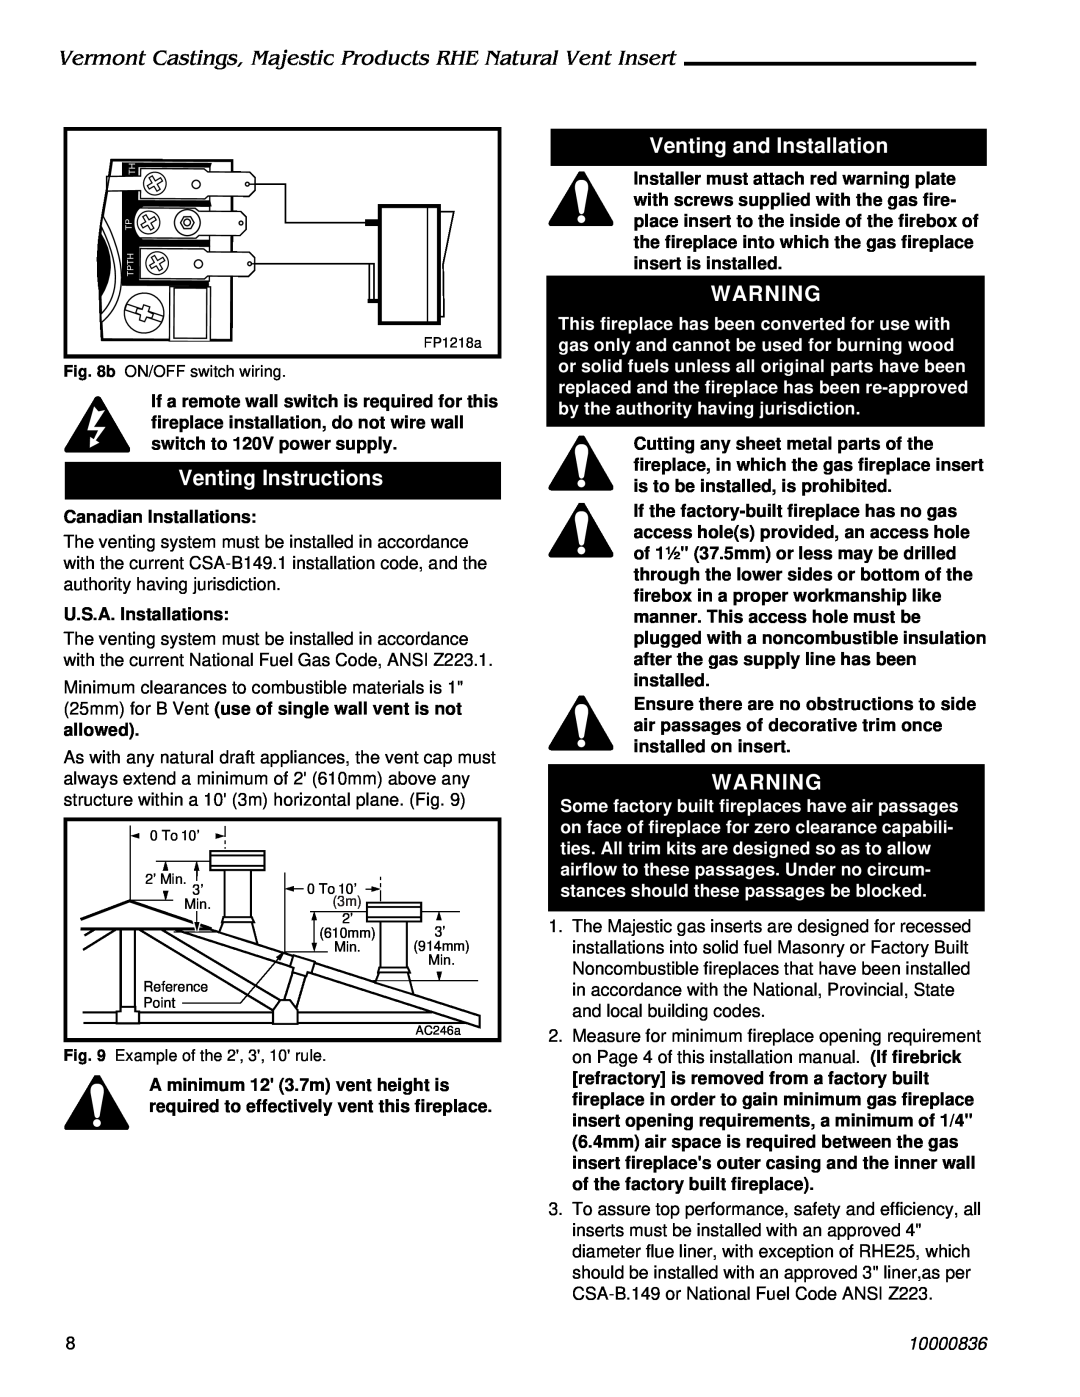 Vermont Casting RHE32, RHE42 Venting Instructions, Venting and Installation, Canadian Installations, U.S.A. Installations 